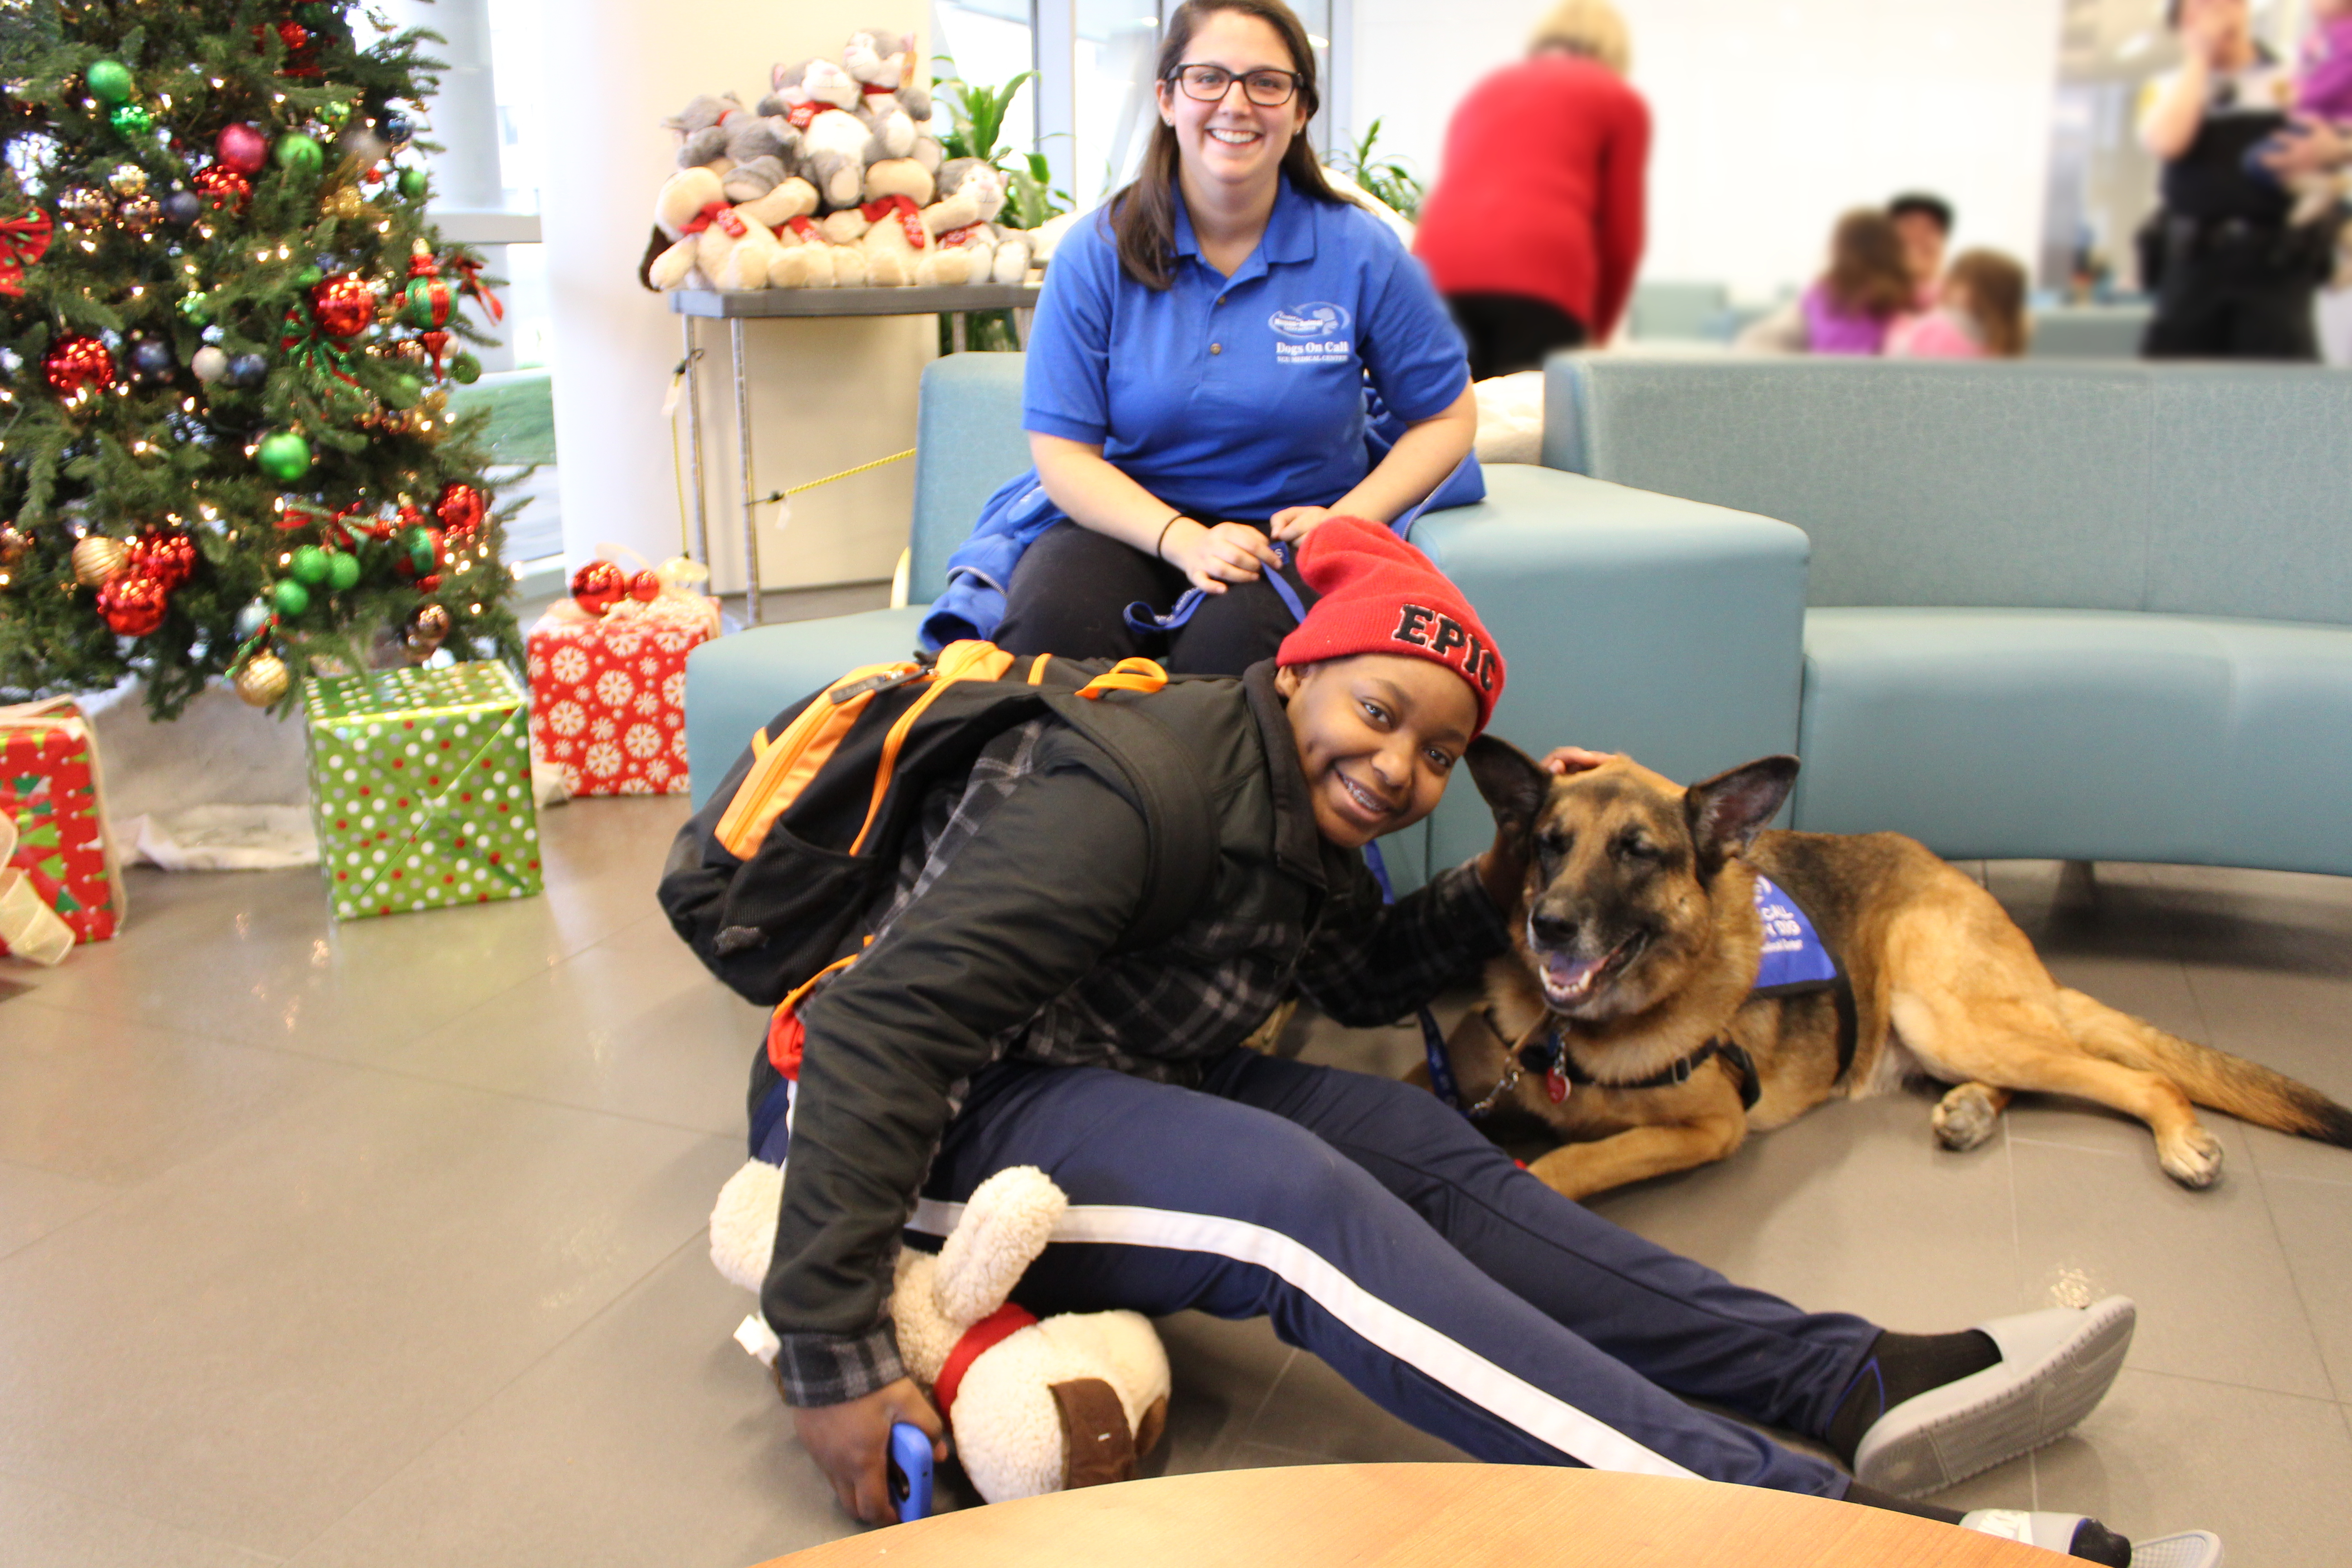 Therapy dog Dahlia, a german shepherd, lays on the floor beside a friend who is also holding a PetSmart Charities stuffed dog. Dahlia's handler sits behind them smiling.